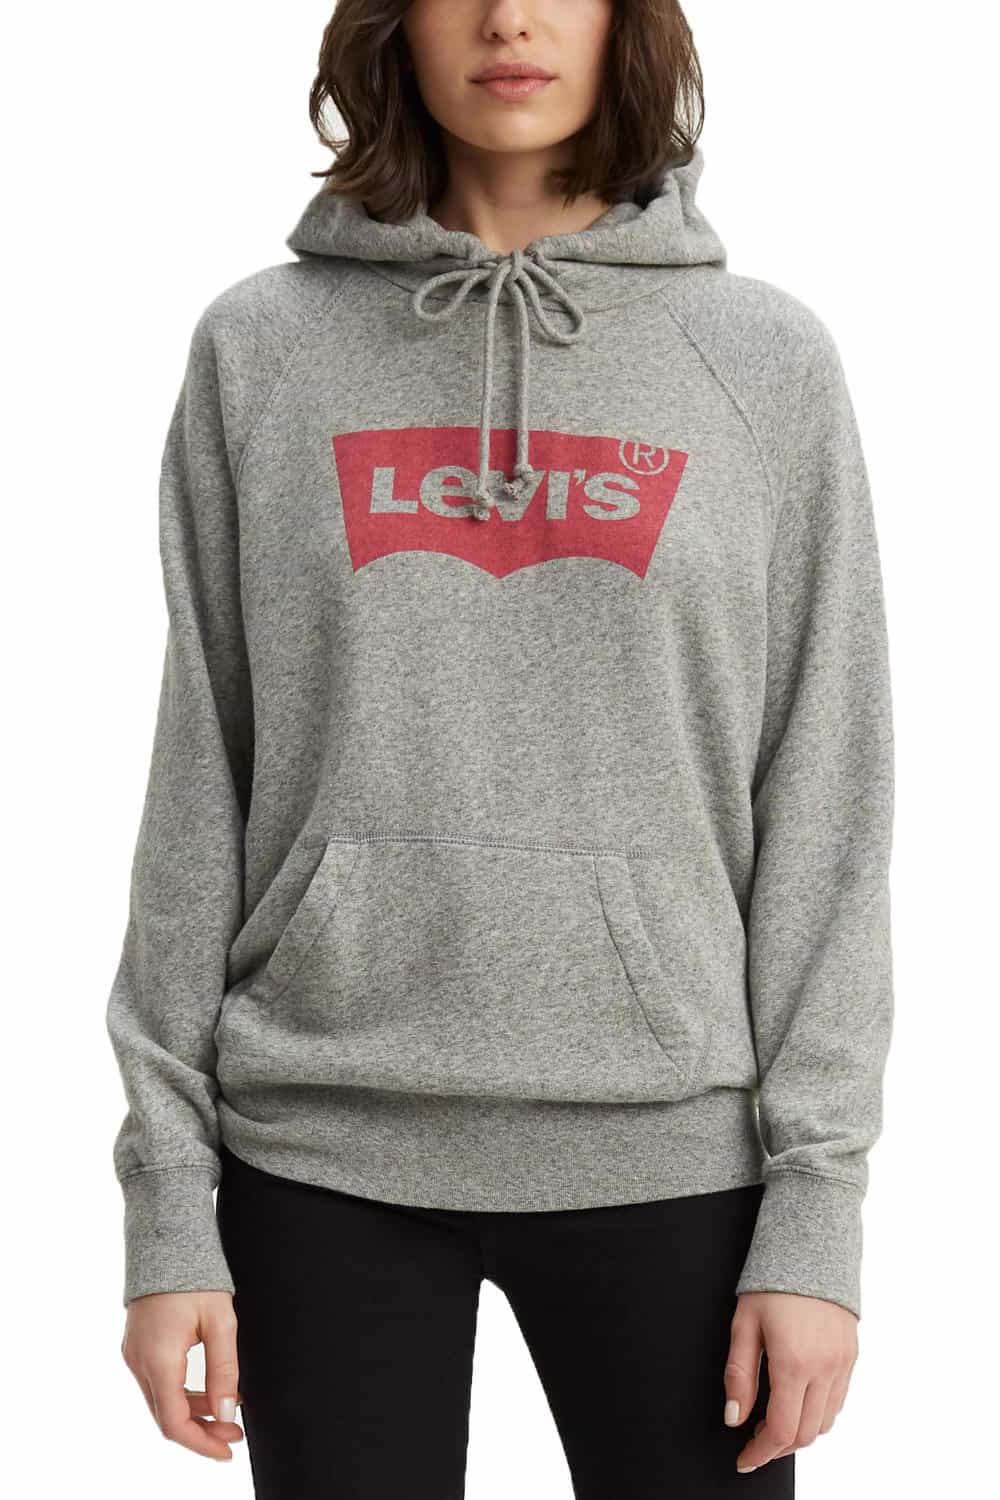 LEVIS Woman sweater 35946-0003 Gray - Barbopoulos store, Chania